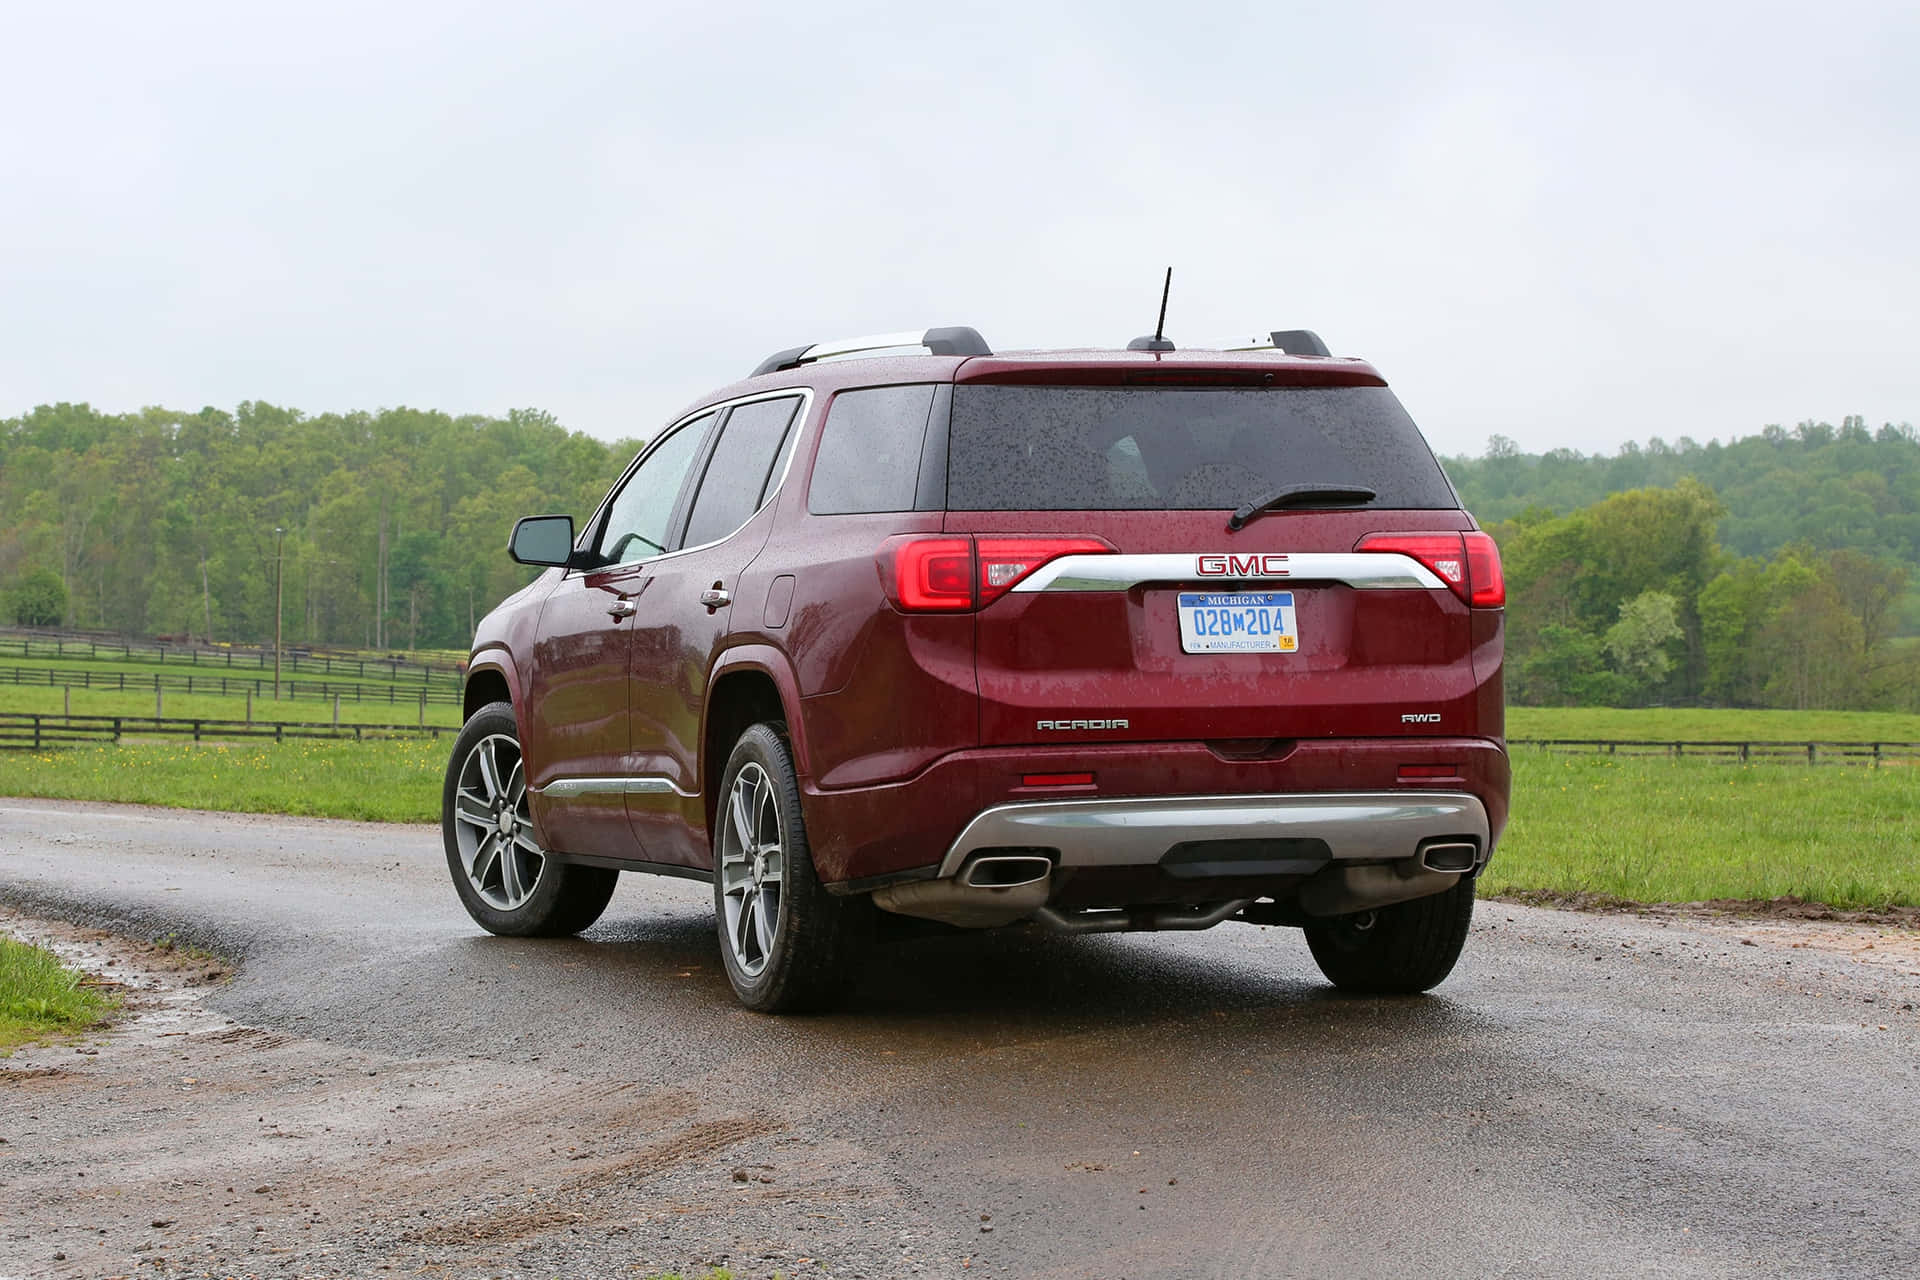 Stunning GMC Acadia in a Picturesque Setting Wallpaper